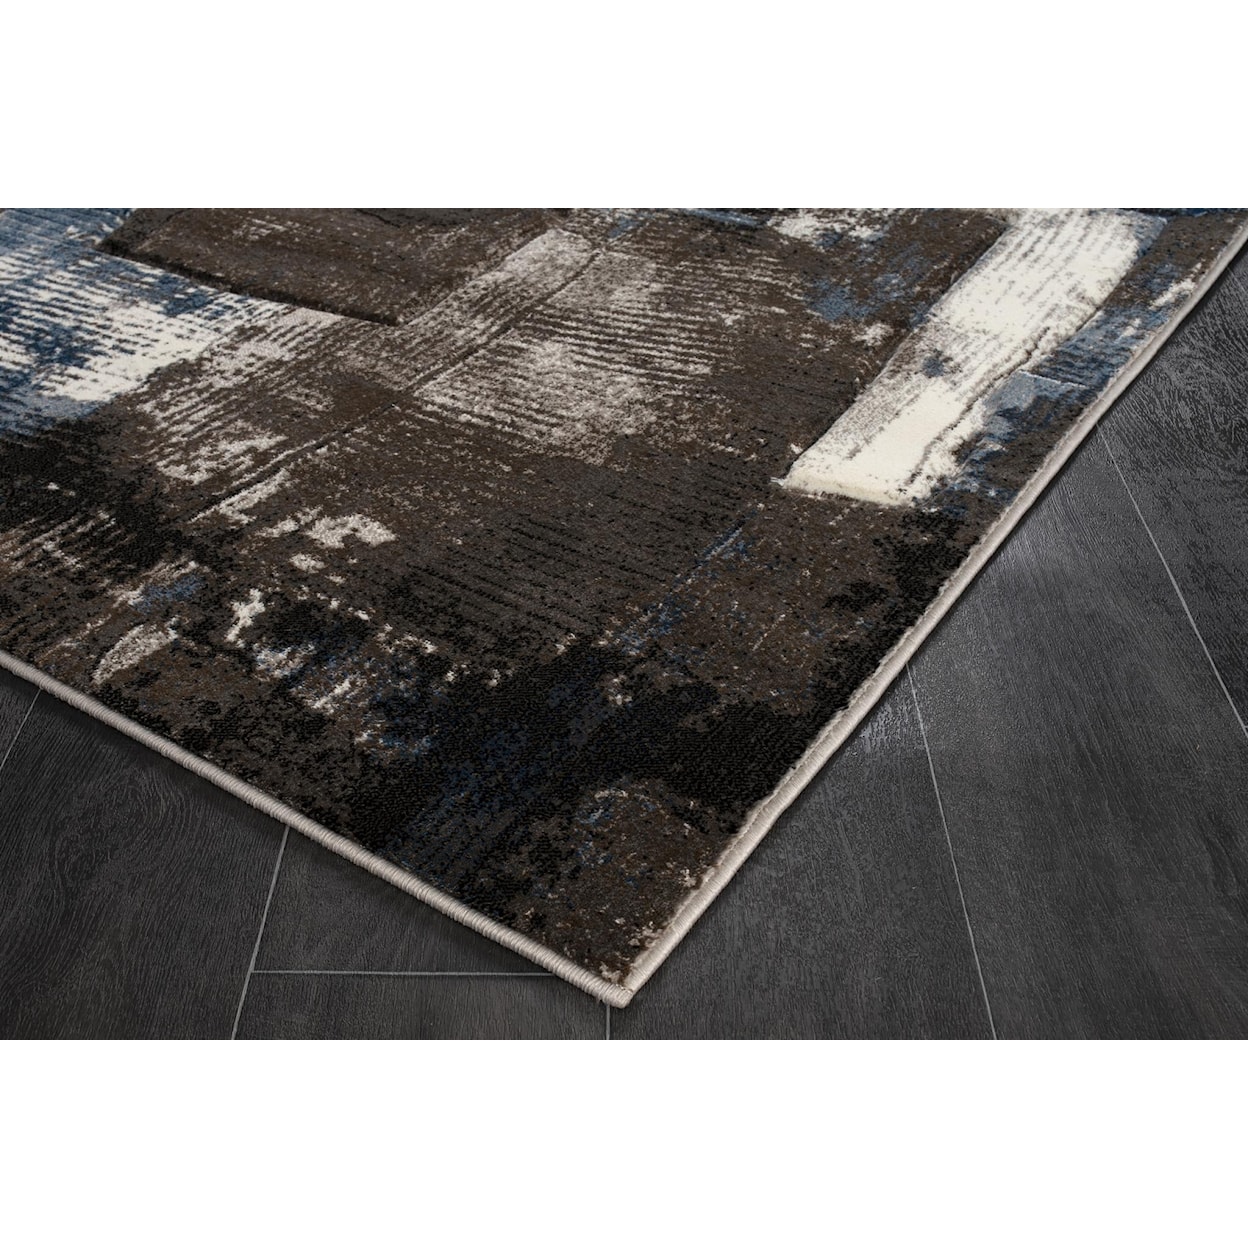 MDA Rugs Rhodes Collection RHODES 8X11 BLUE/BROWN AREA RUG |